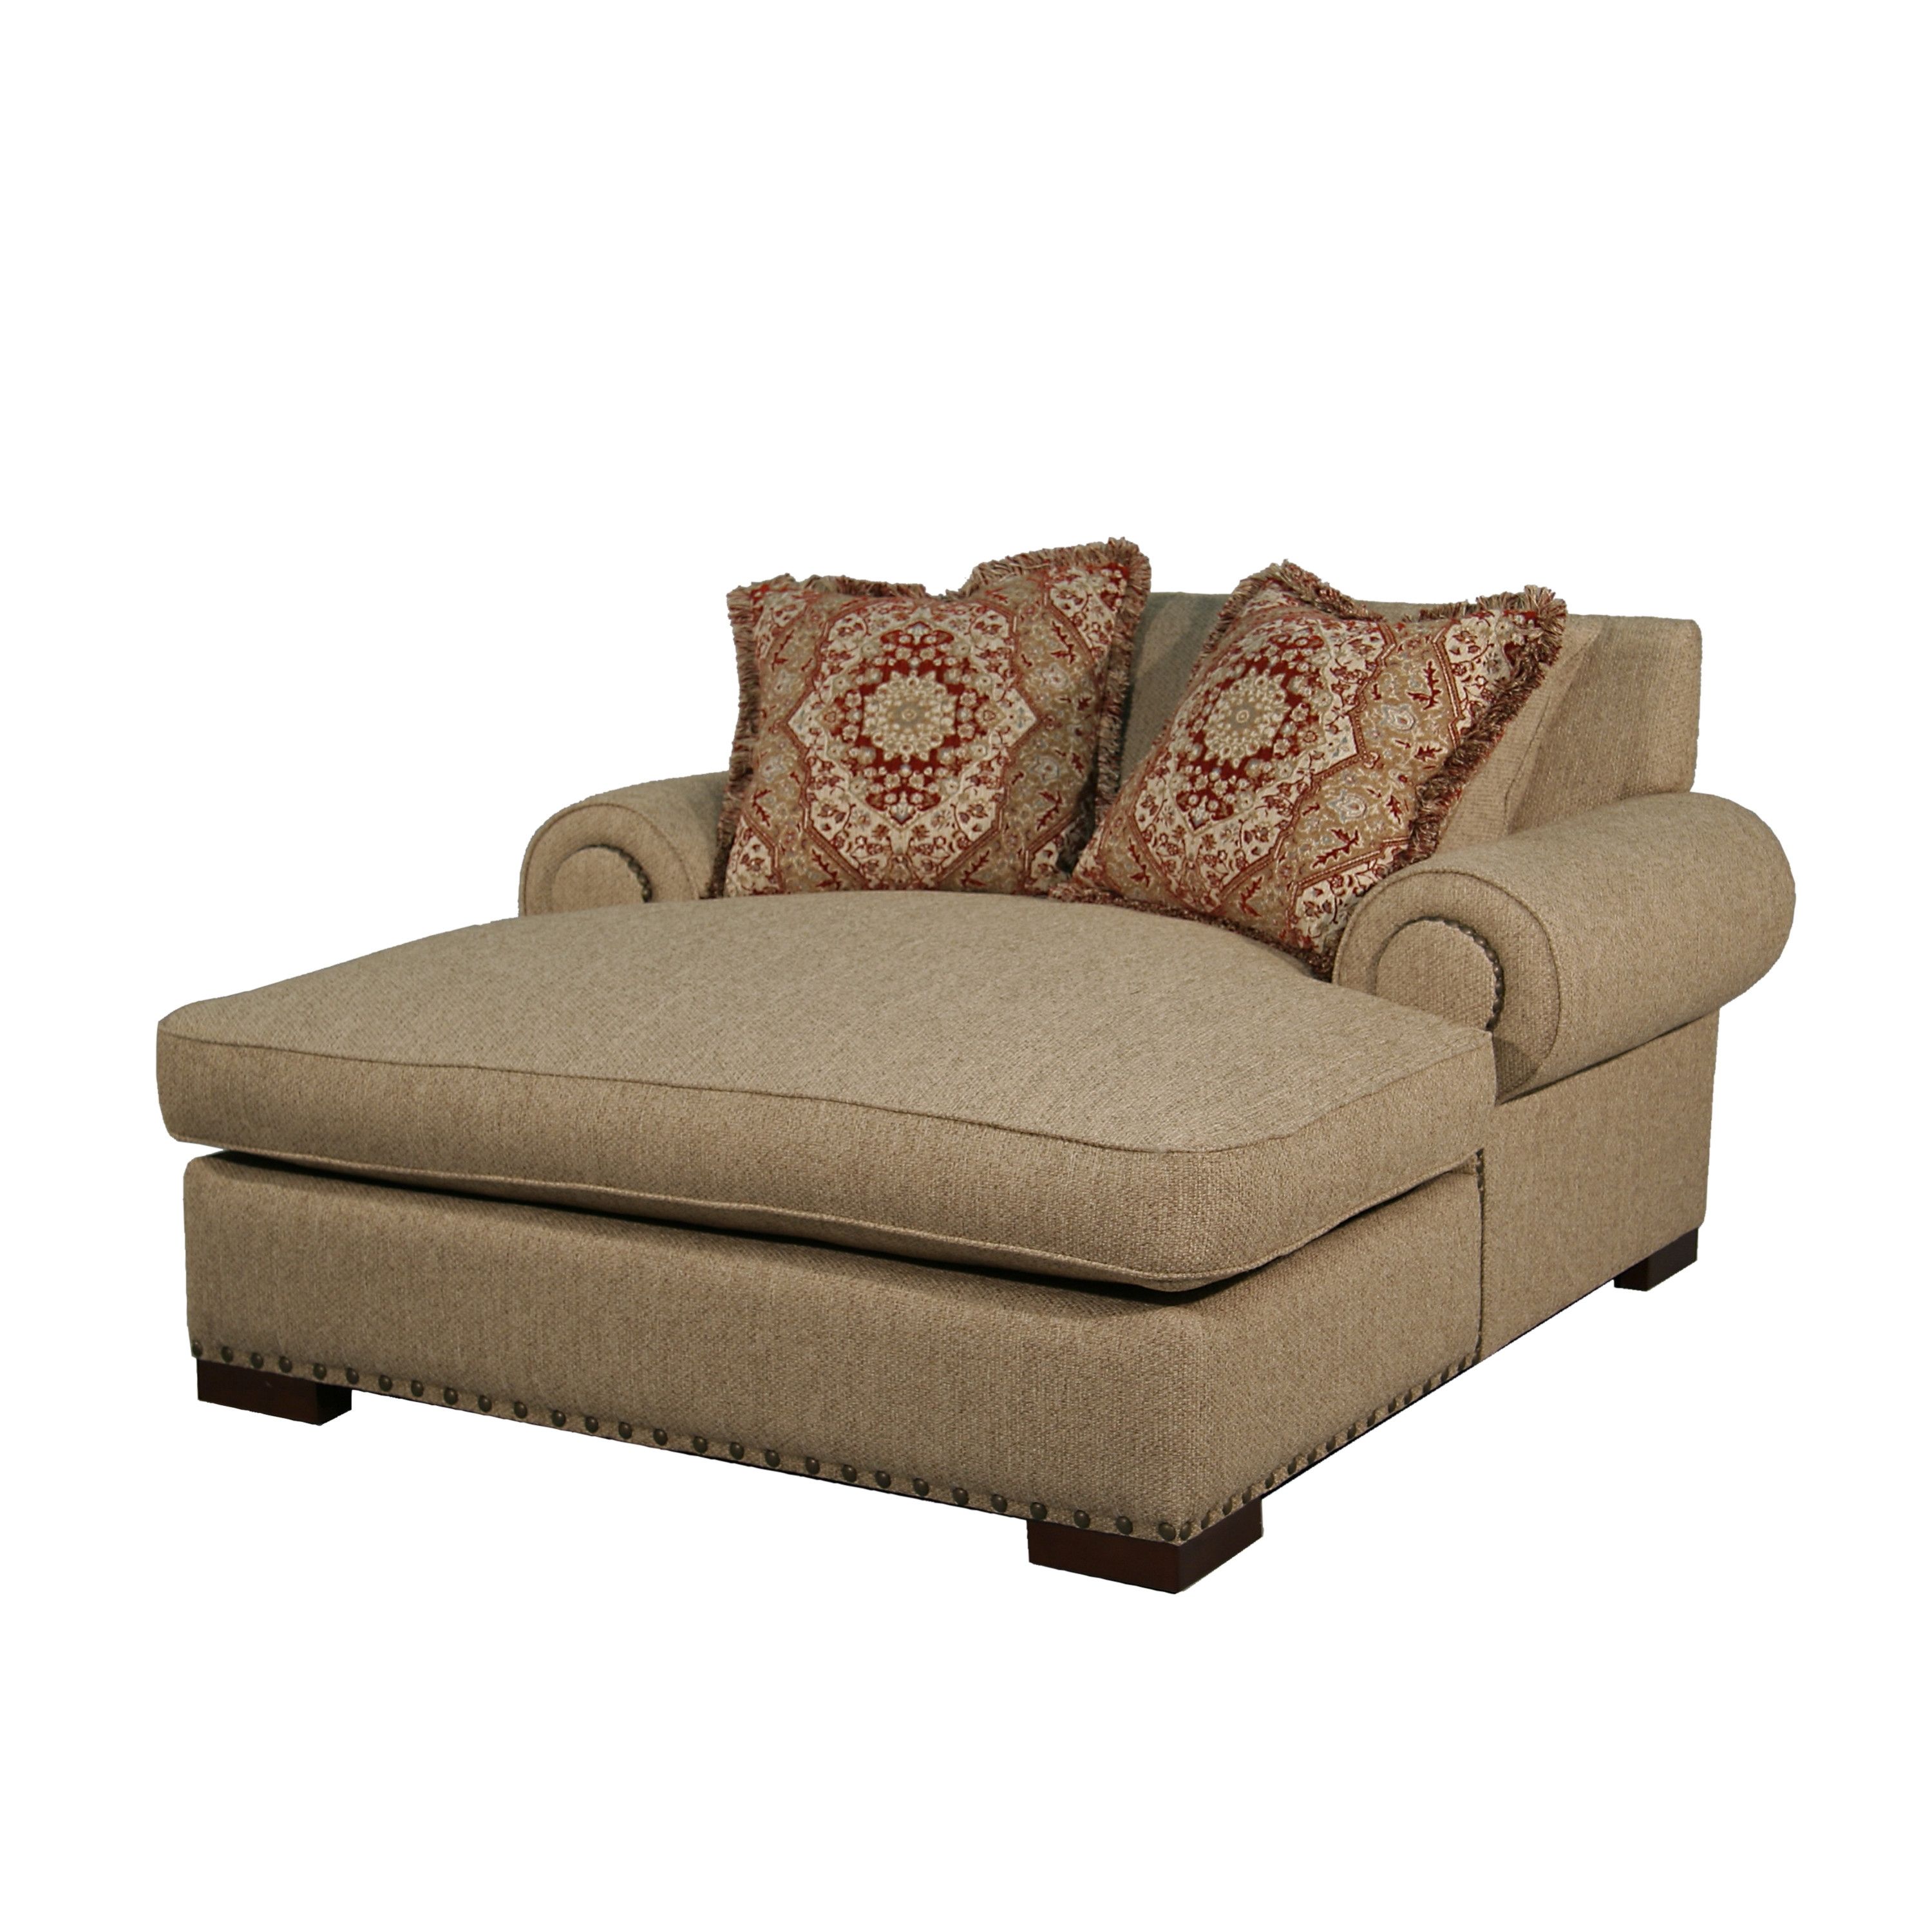 Chaise Lounge Chairs With Two Arms For Widely Used Chaise Lounge Chairs Two Arms • Lounge Chairs Ideas (View 5 of 15)